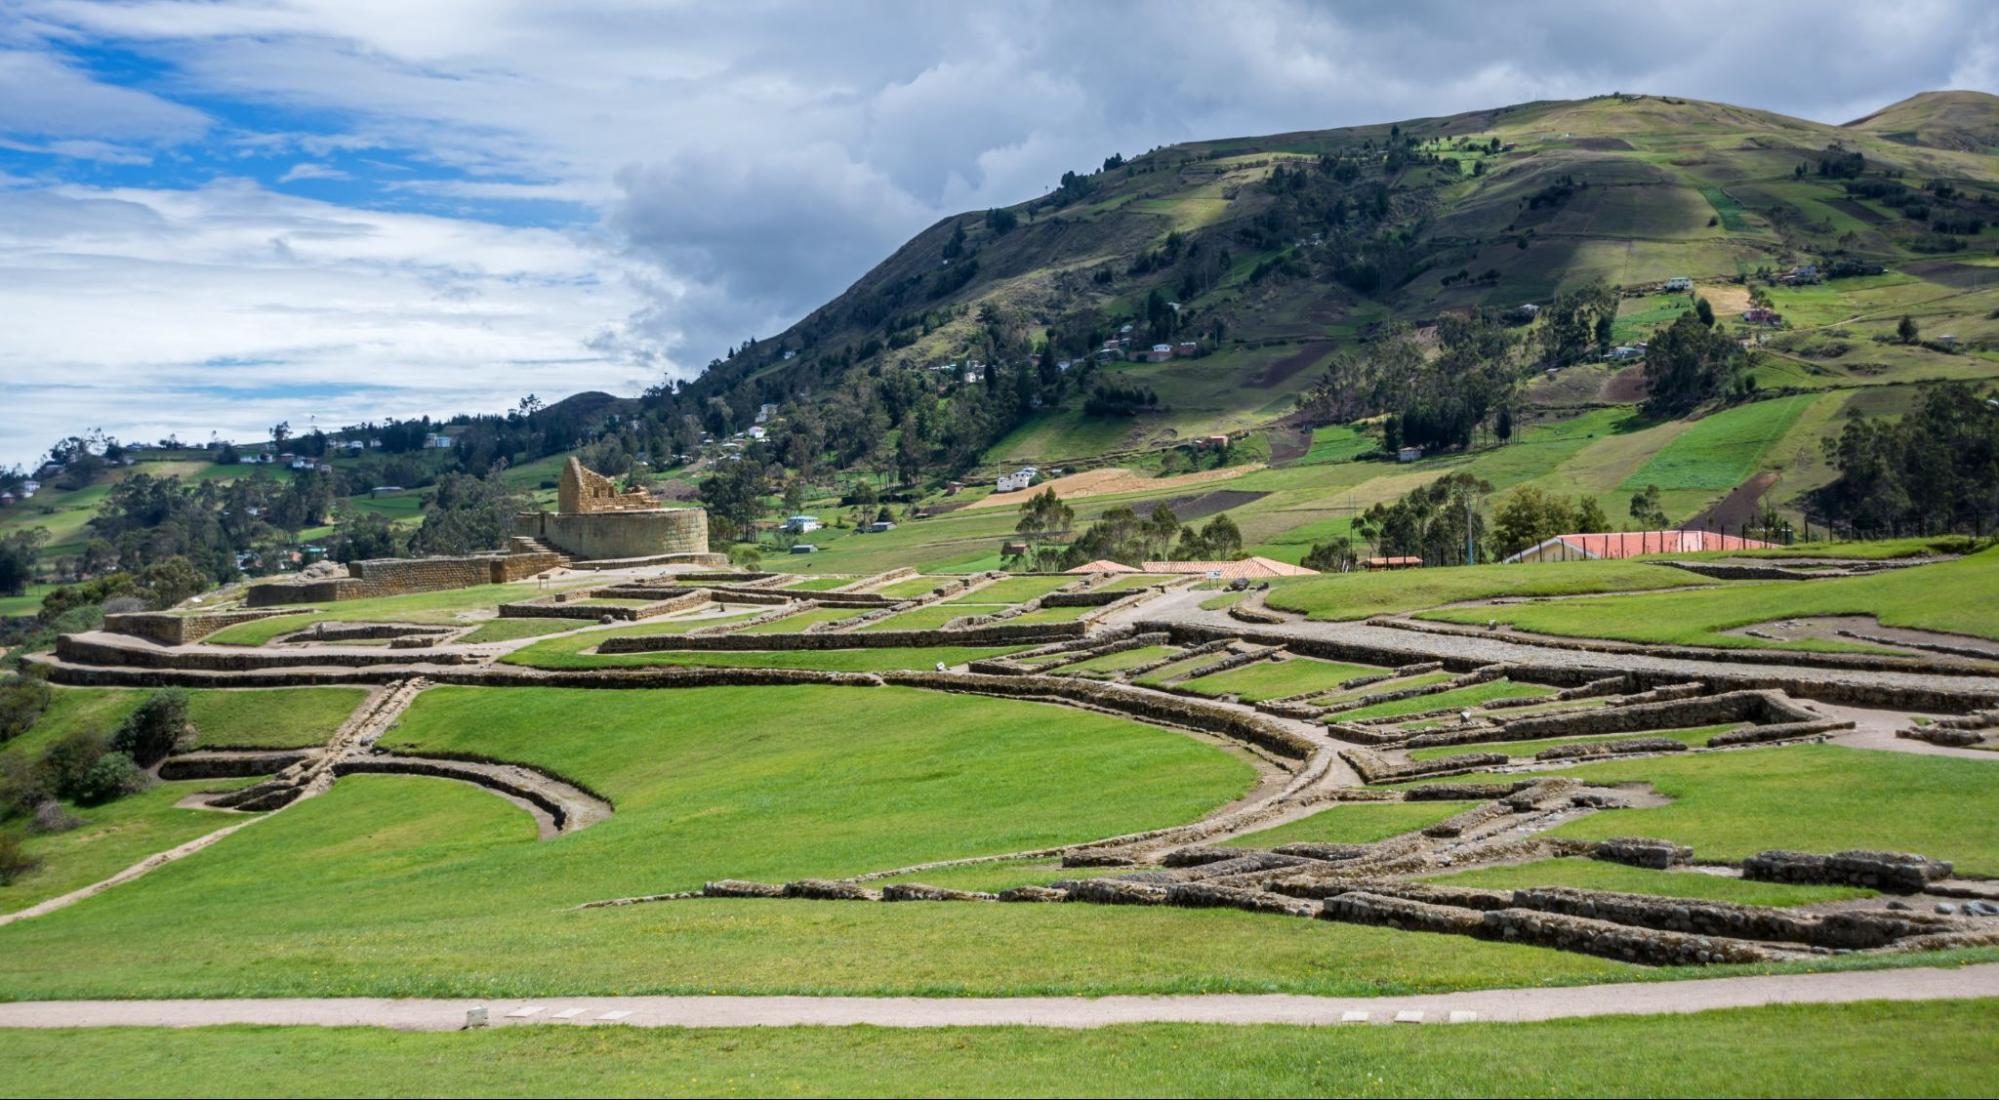 Overall view of the ancient Inca ruins of Ingapirca, Ecuador, on an overcast day